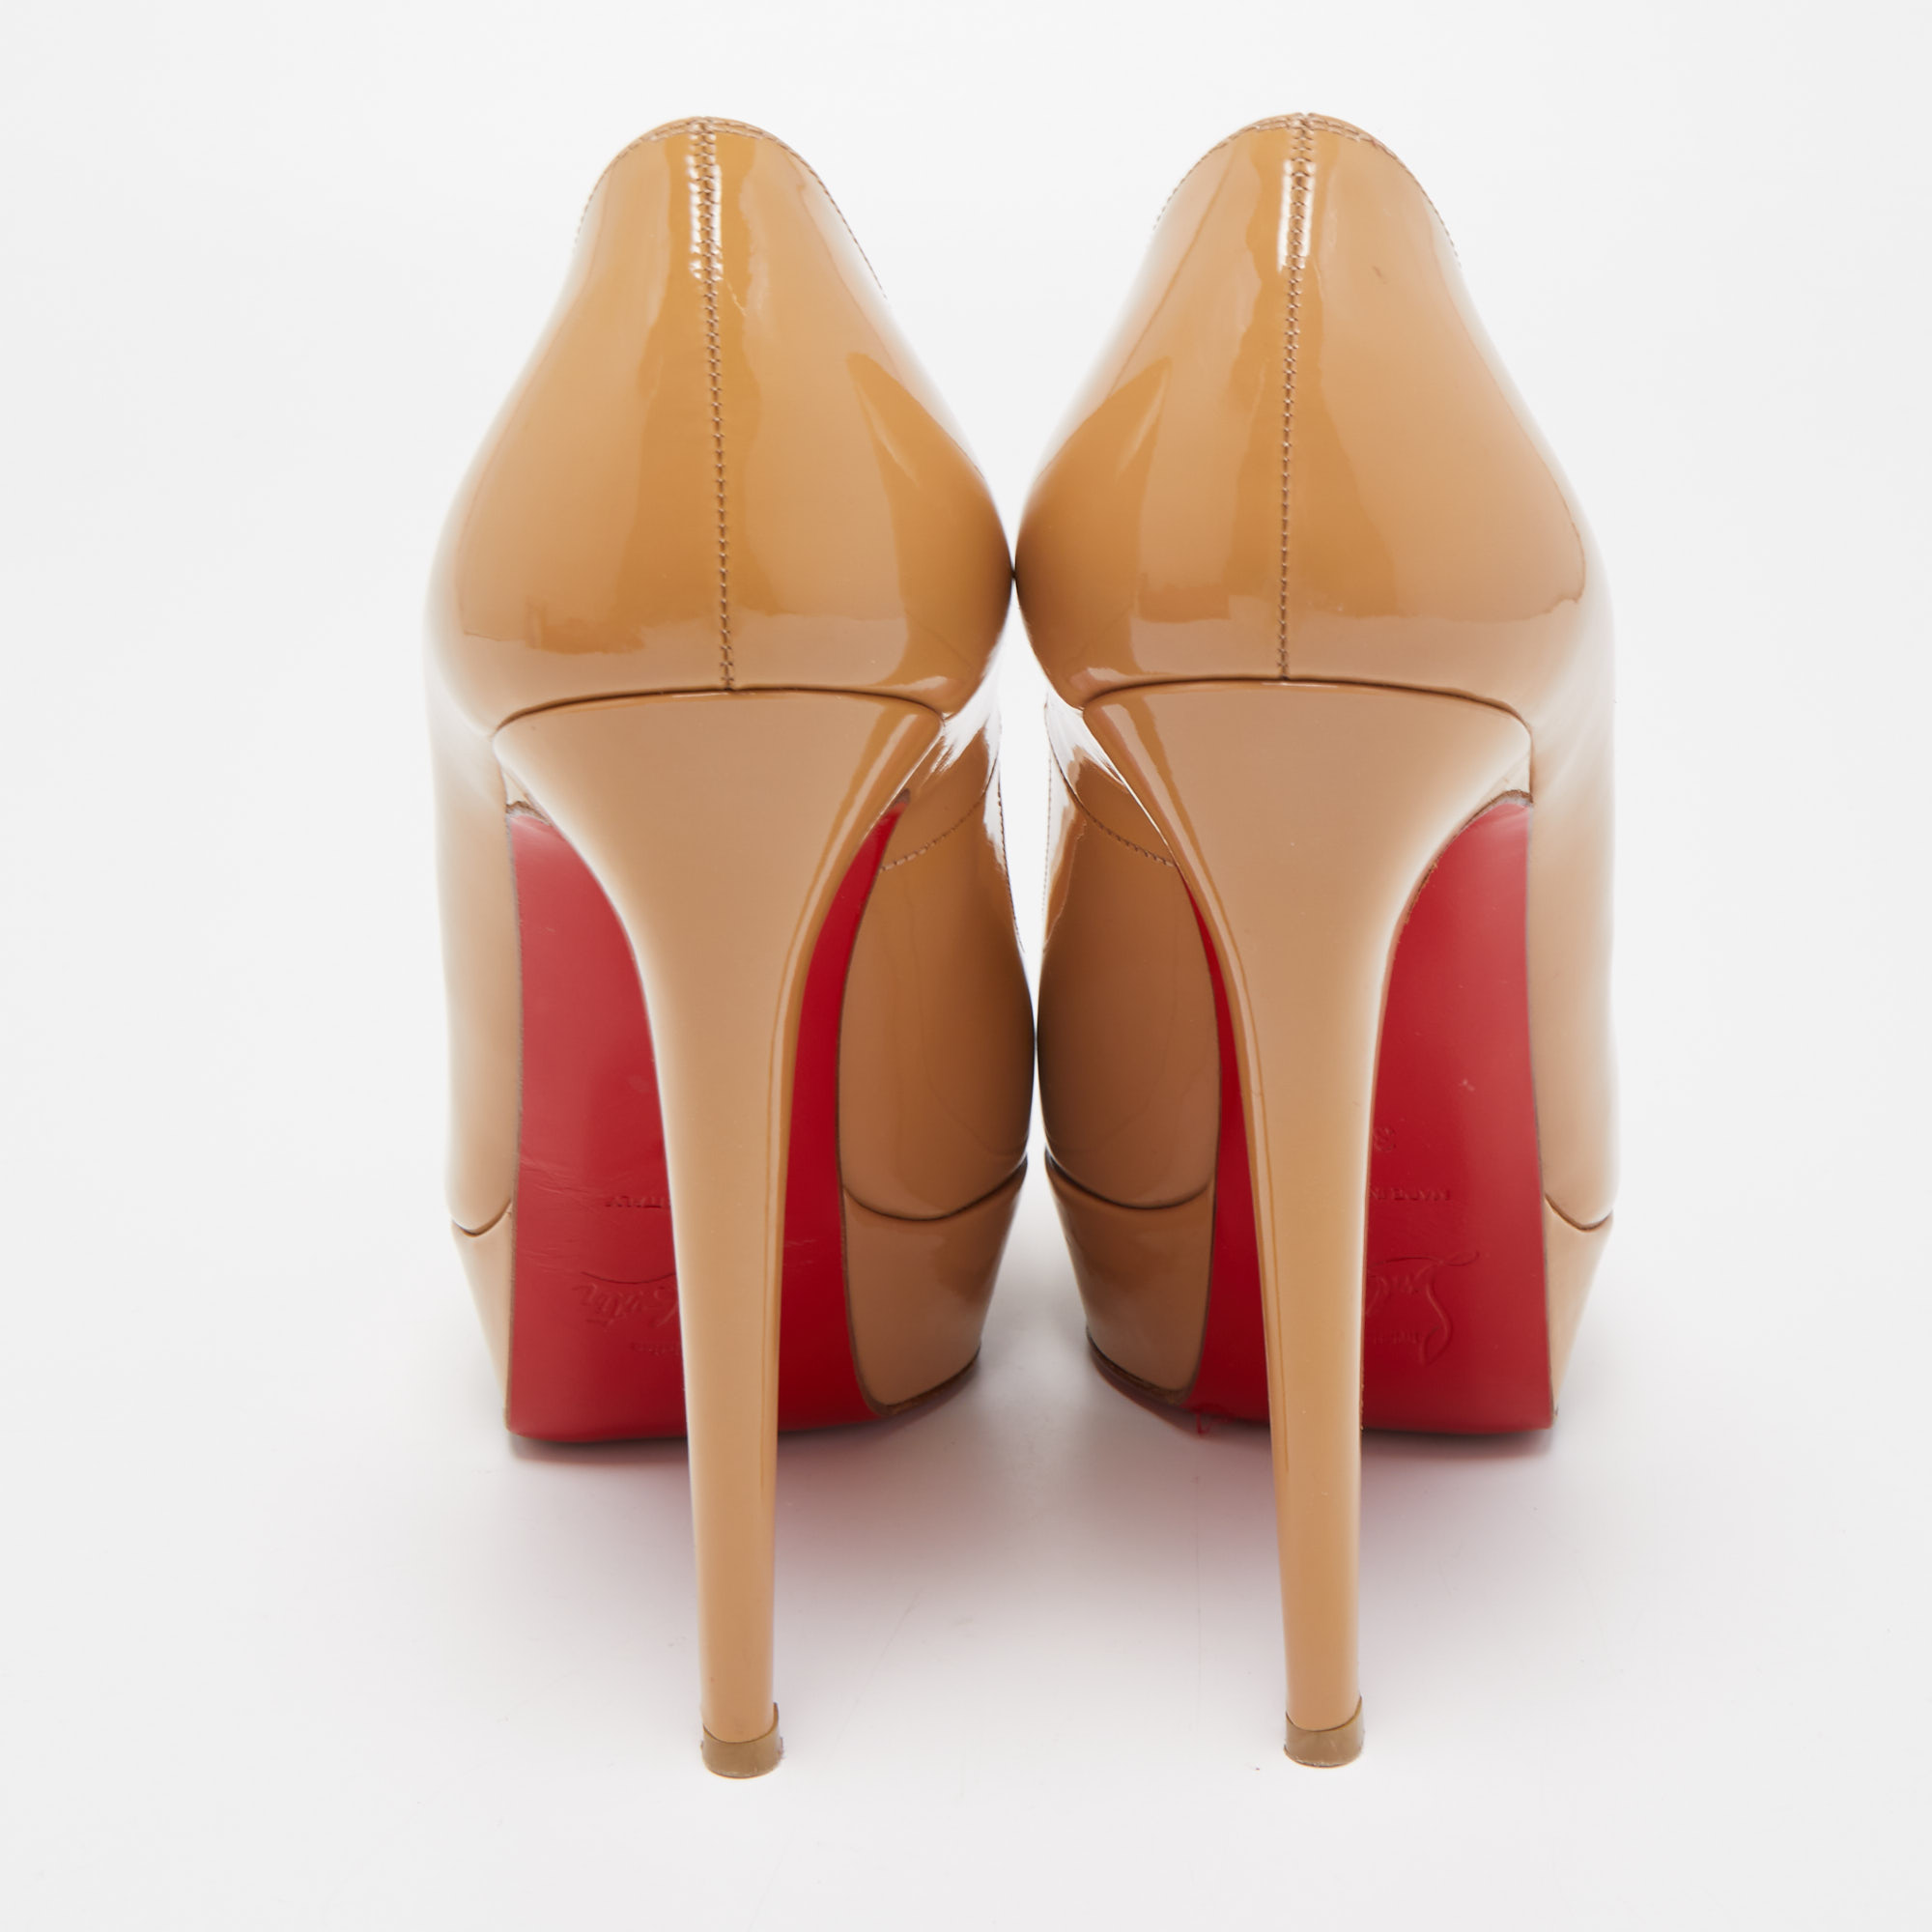 Christian Louboutin Beige Patent Leather Bianca Pumps Size 39